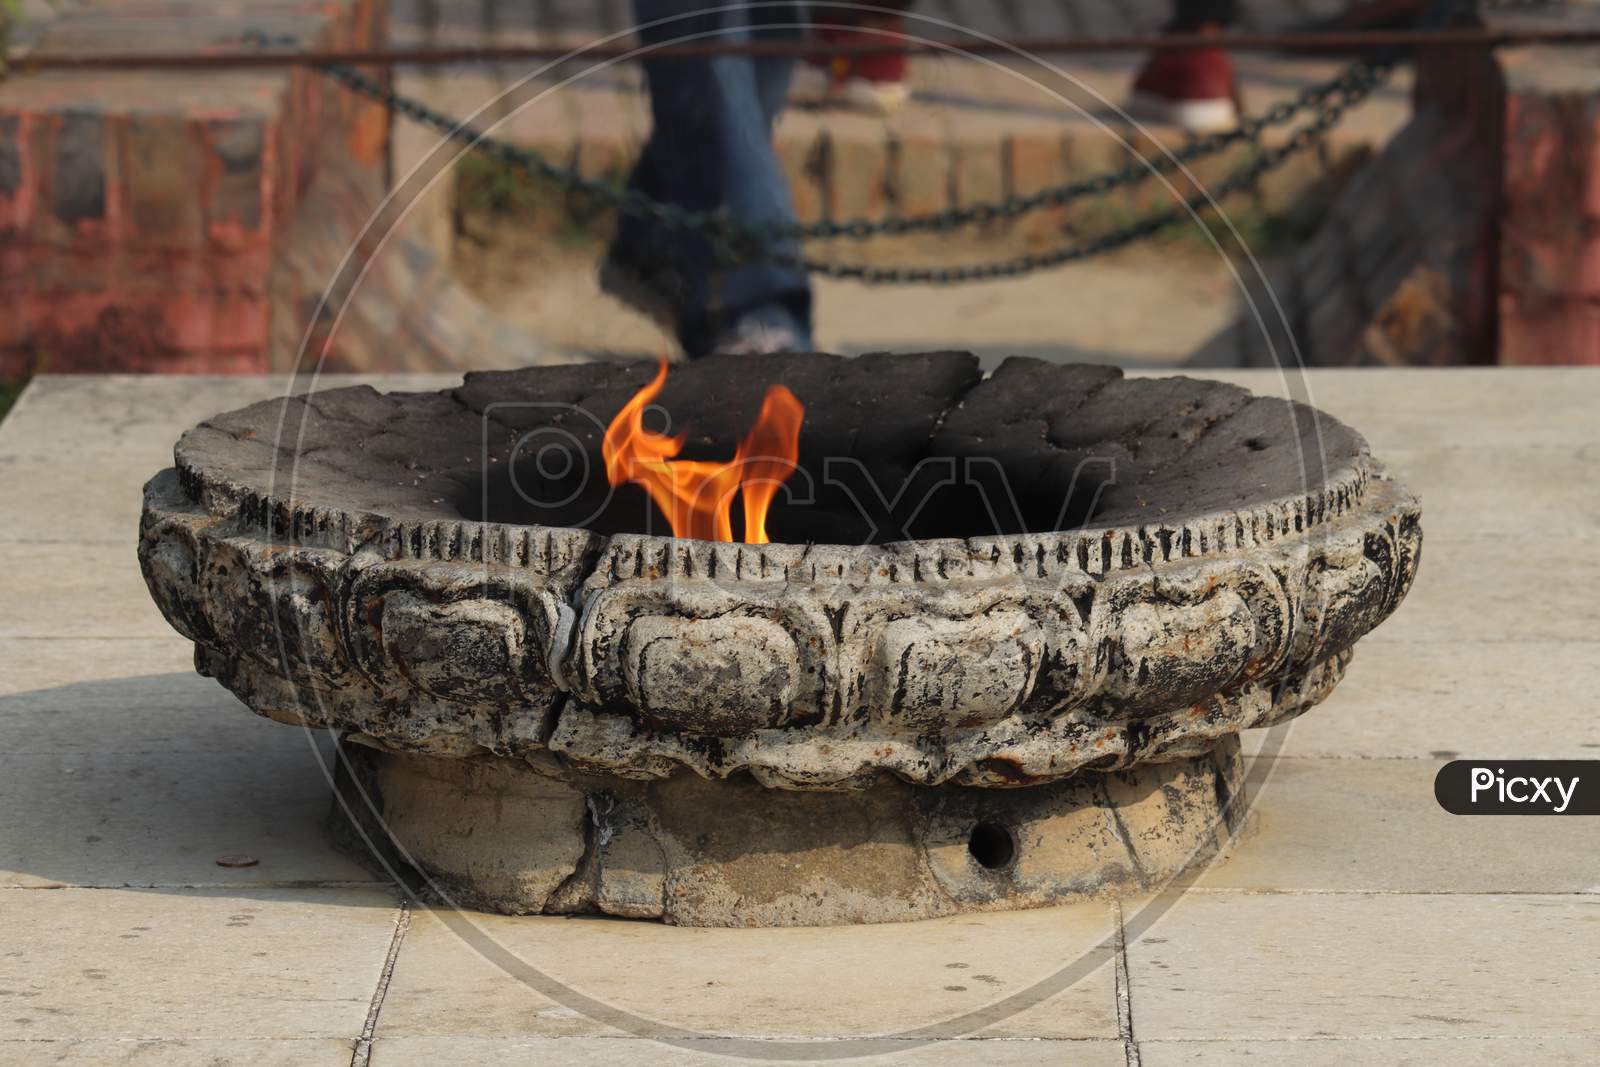 Eternal or Endless flame symbolized peace and harmony at Lumbini, Nepal .